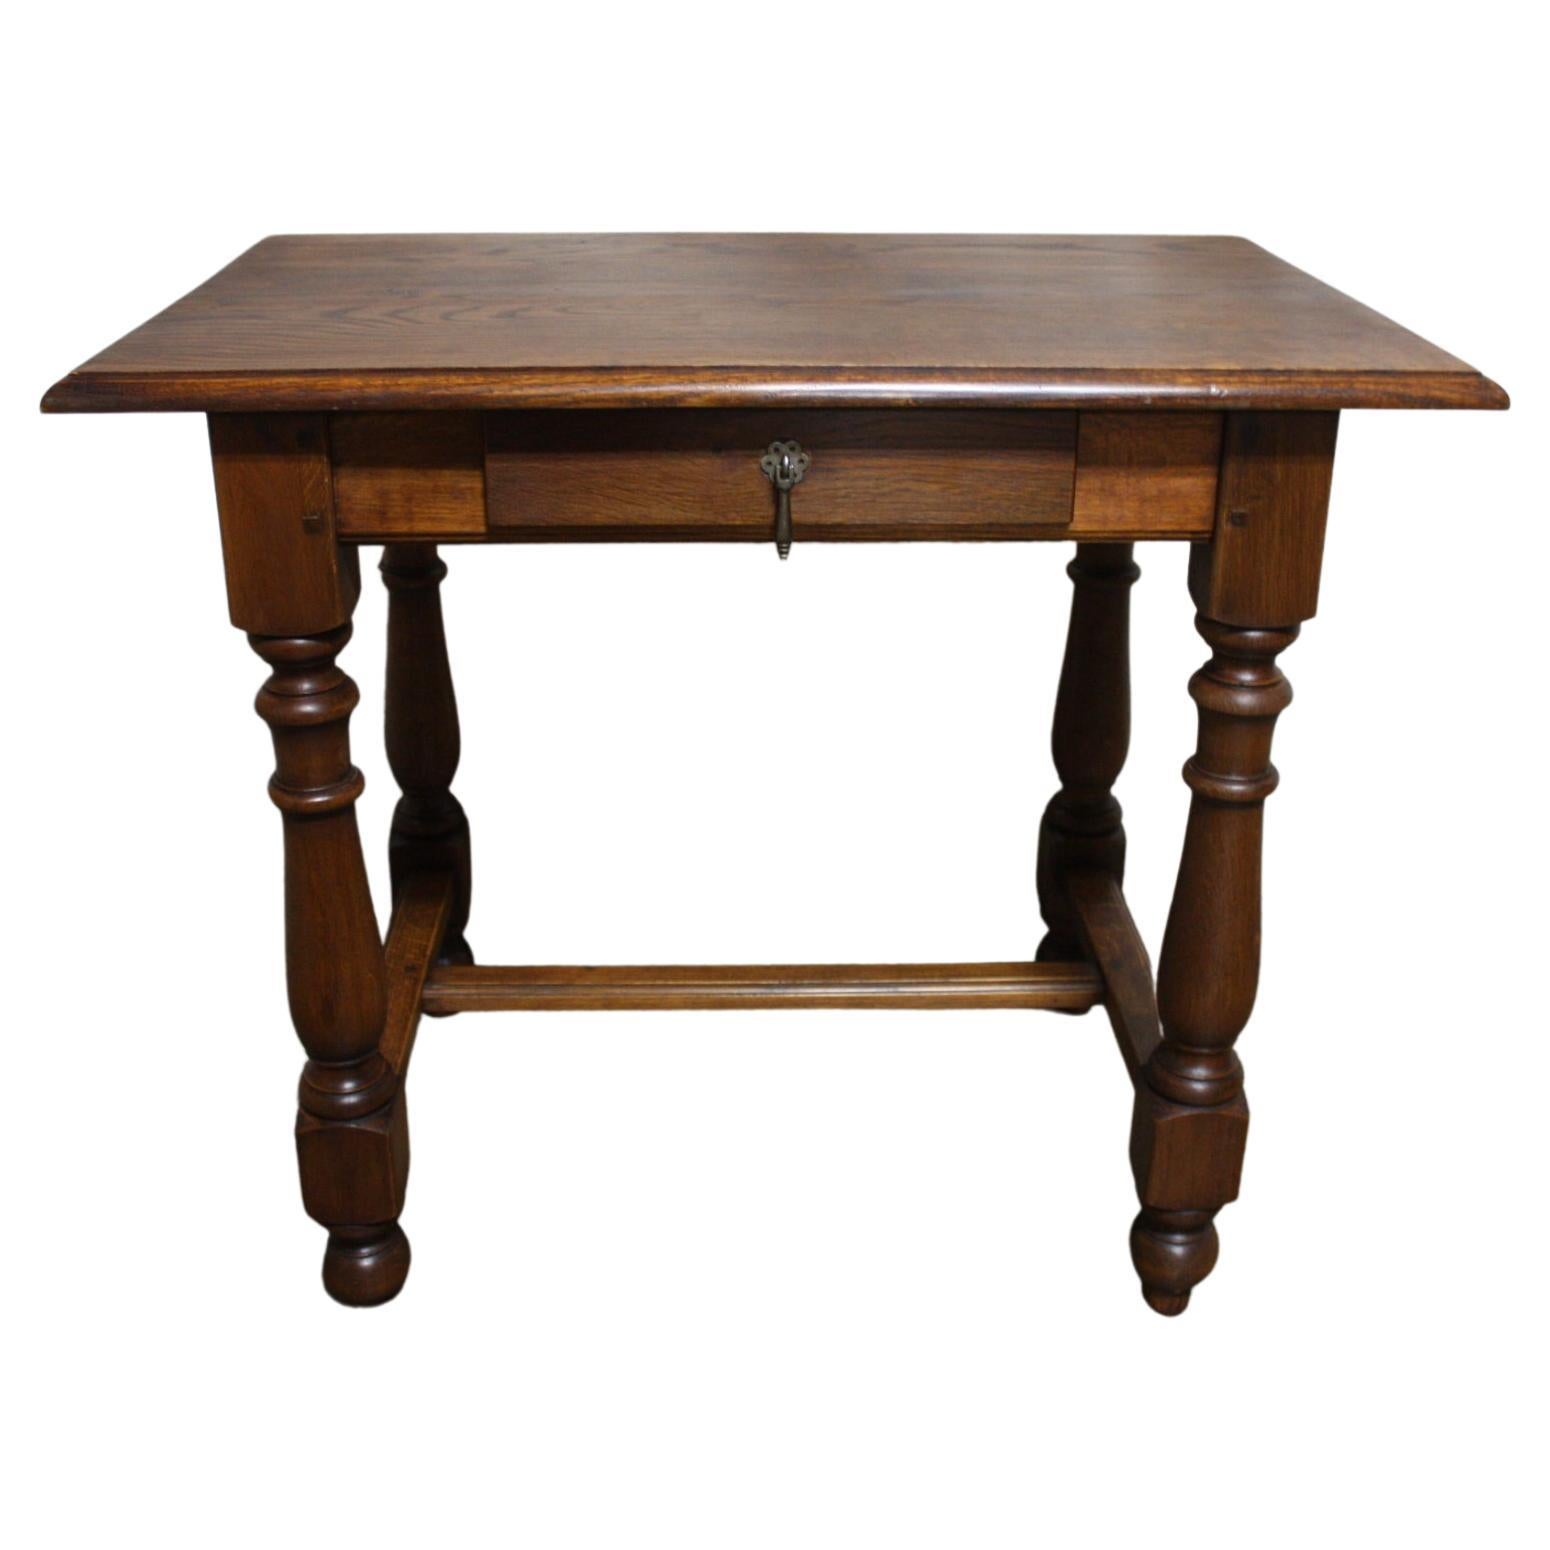 French, Early 20th Century, Writing Table